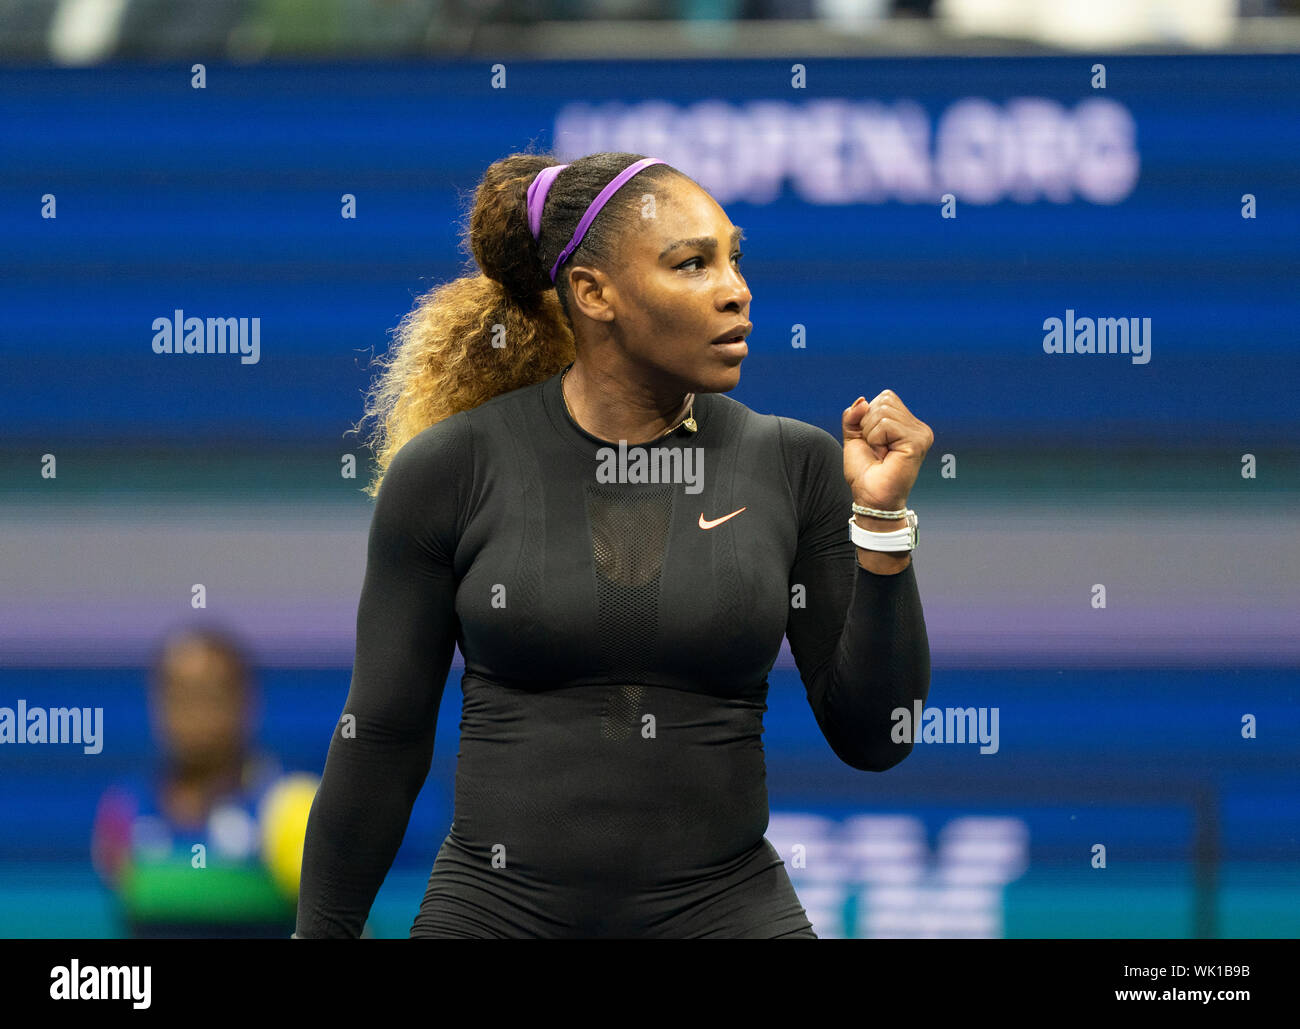 New York, NY - September 3, 2019: Serena Williams (USA) in action during quarter final of US Open Championships against Qiang Wang (China) at Billie Jean King National Tennis Center Stock Photo